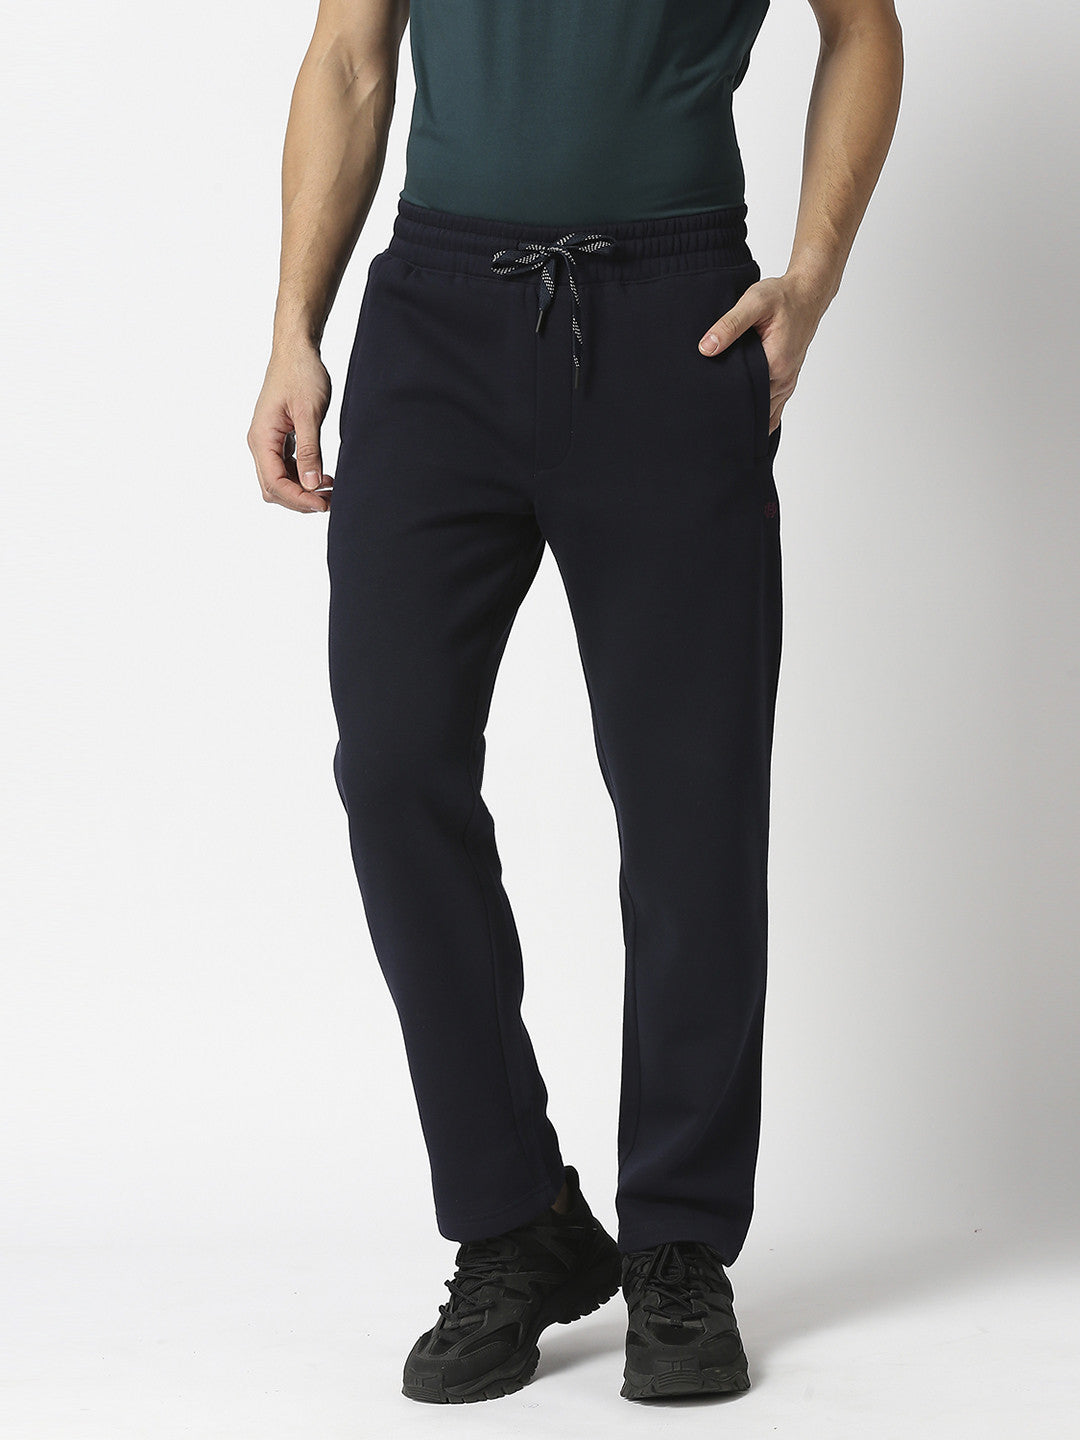 Fleece Trackpants: Buy Fleece Trackpants for Men Online at Low Prices -  Snapdeal India